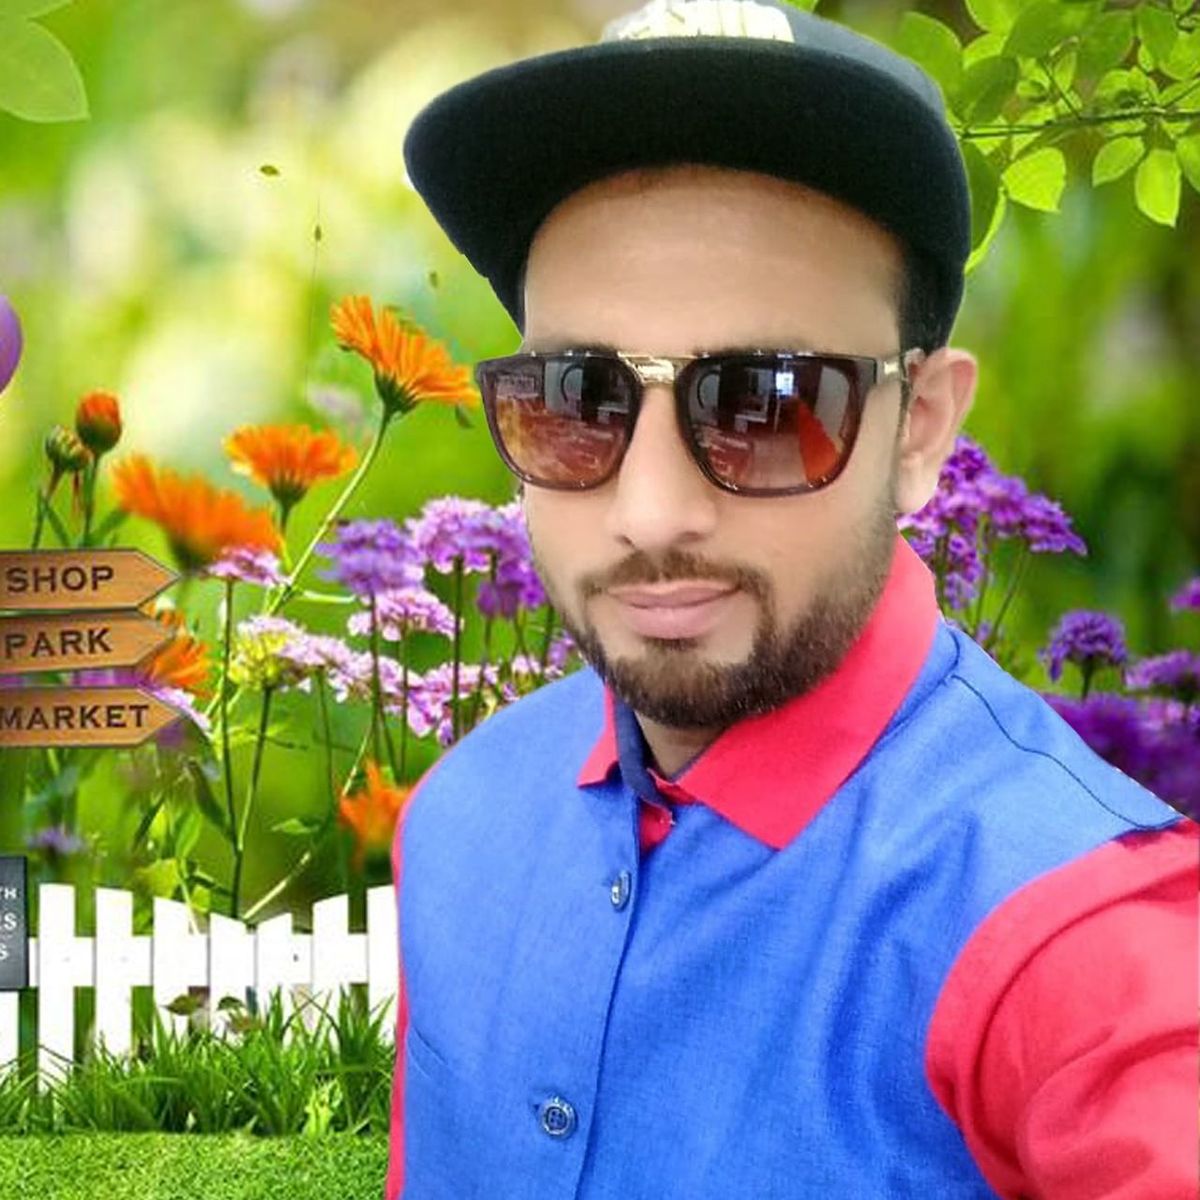 glasses, sunglasses, fashion, flower, portrait, one person, flowering plant, hat, plant, young adult, smiling, beard, headshot, young men, looking at camera, beautiful people, day, nature, front view, outdoors